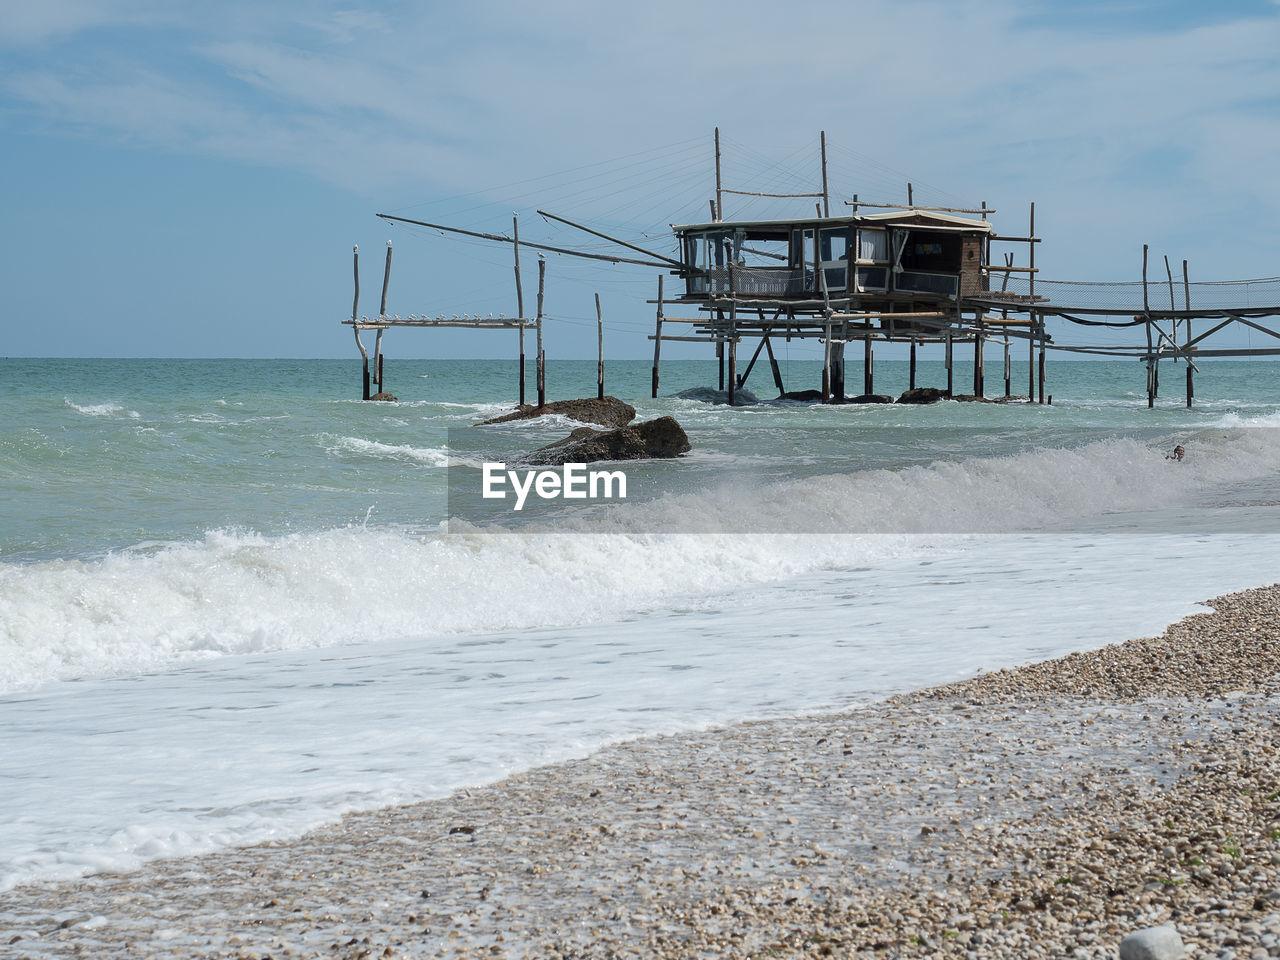 Scenic view of sea against sky at the coast of the trabocchi in the adriatic sea